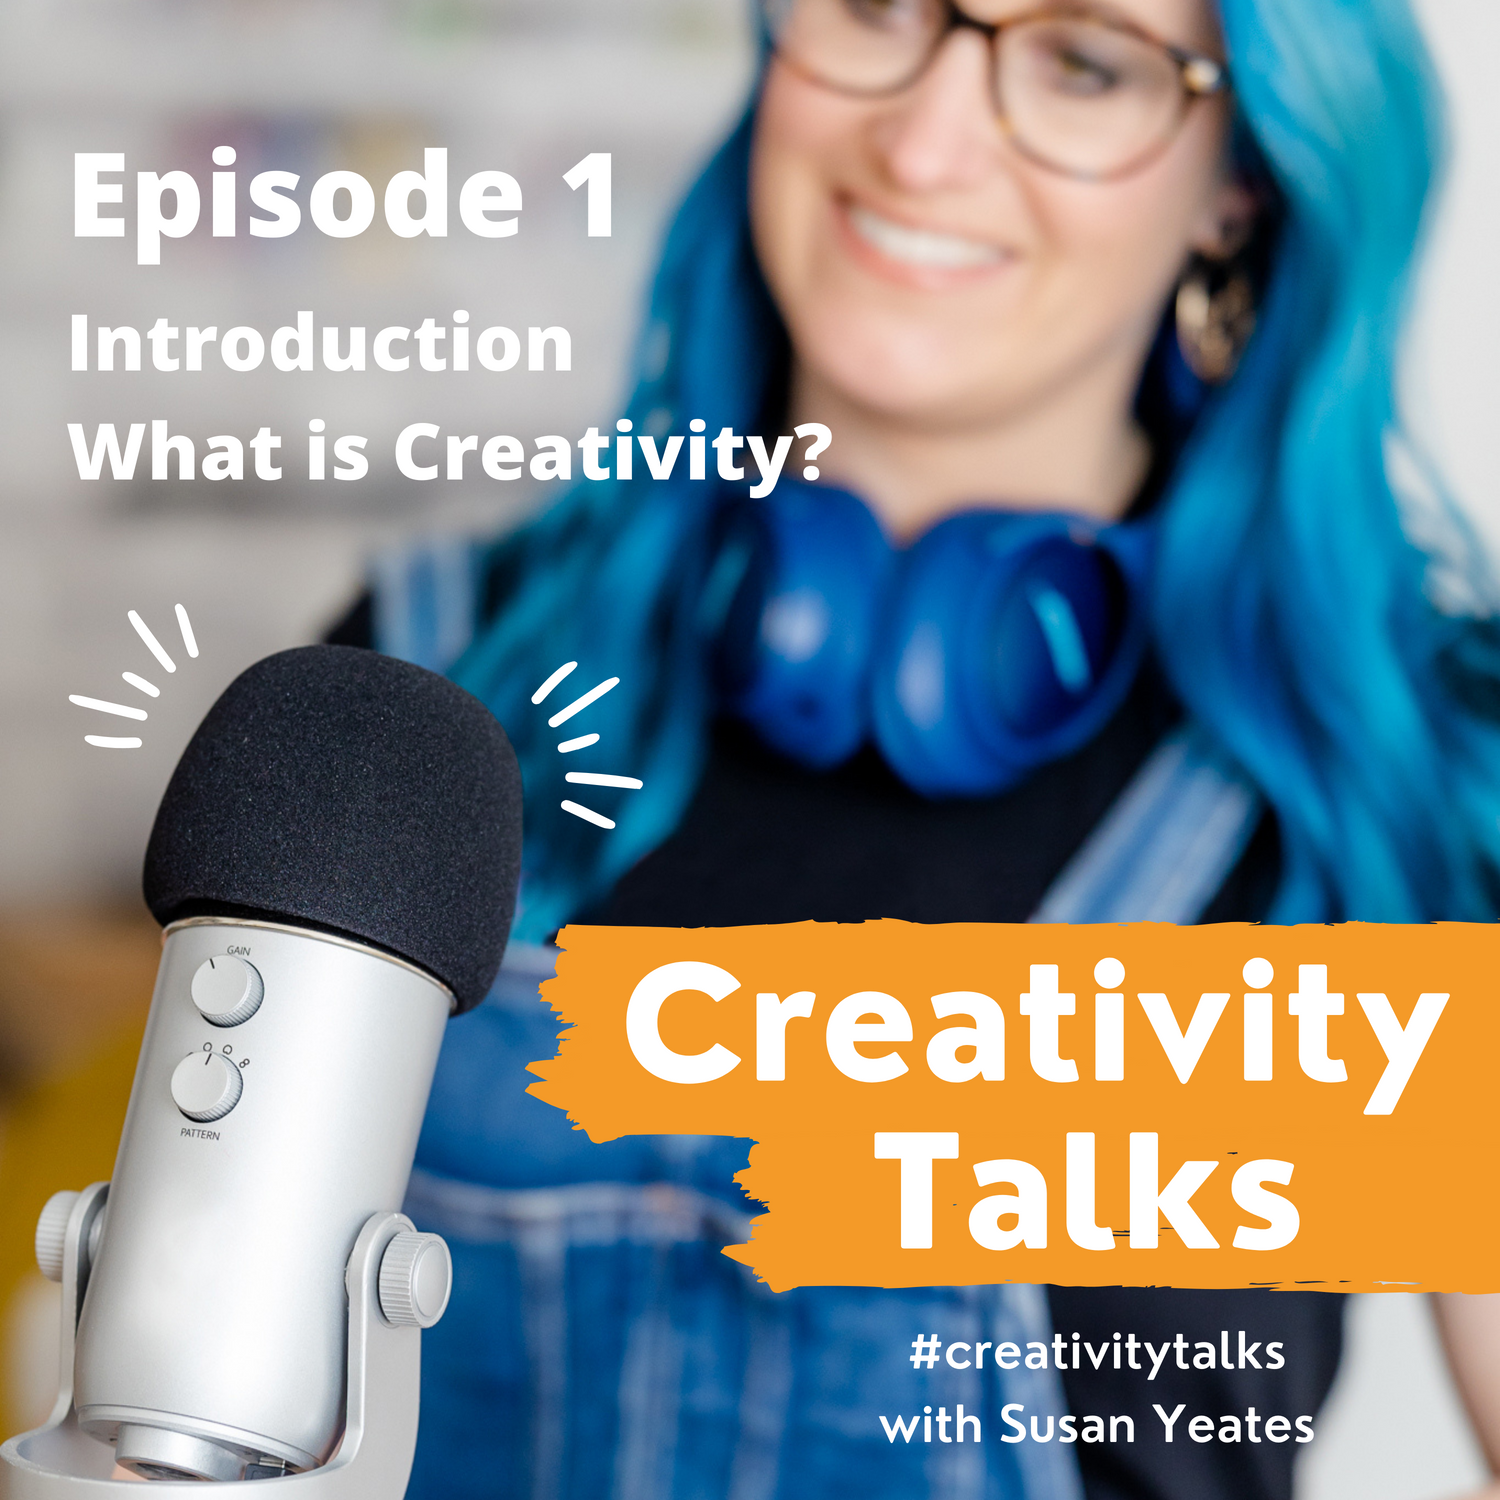 Creativity Talks 1: Introduction and What is Creativity?